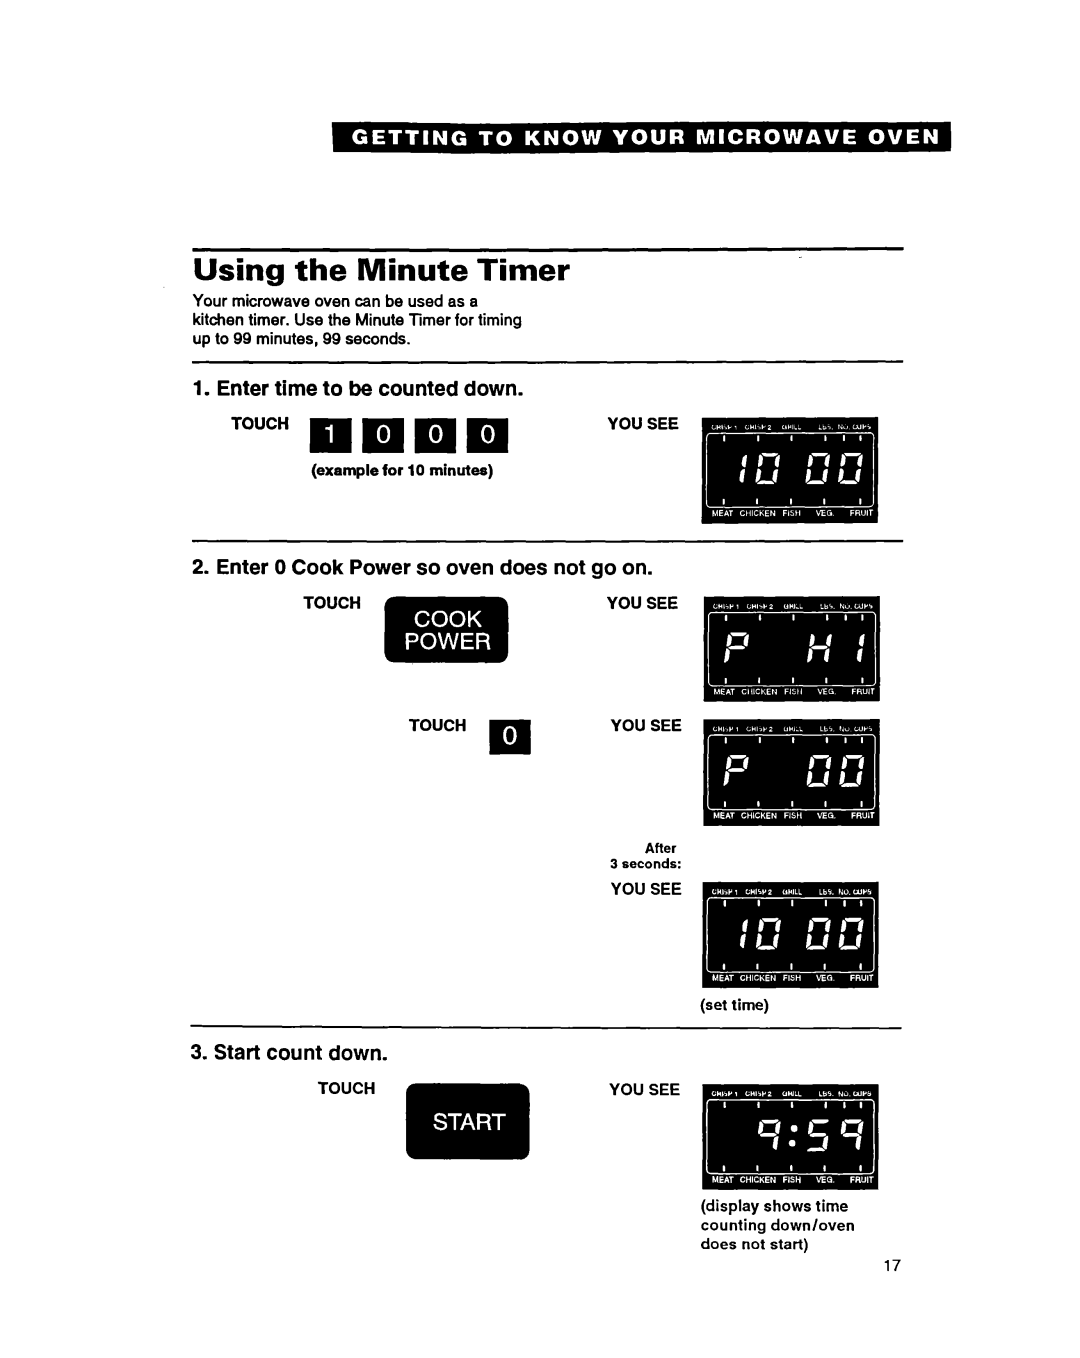 Whirlpool MG207OXAB Using the Minute Timer, Enter time to be counted down, Enter 0 Cook Power so oven does not go on 